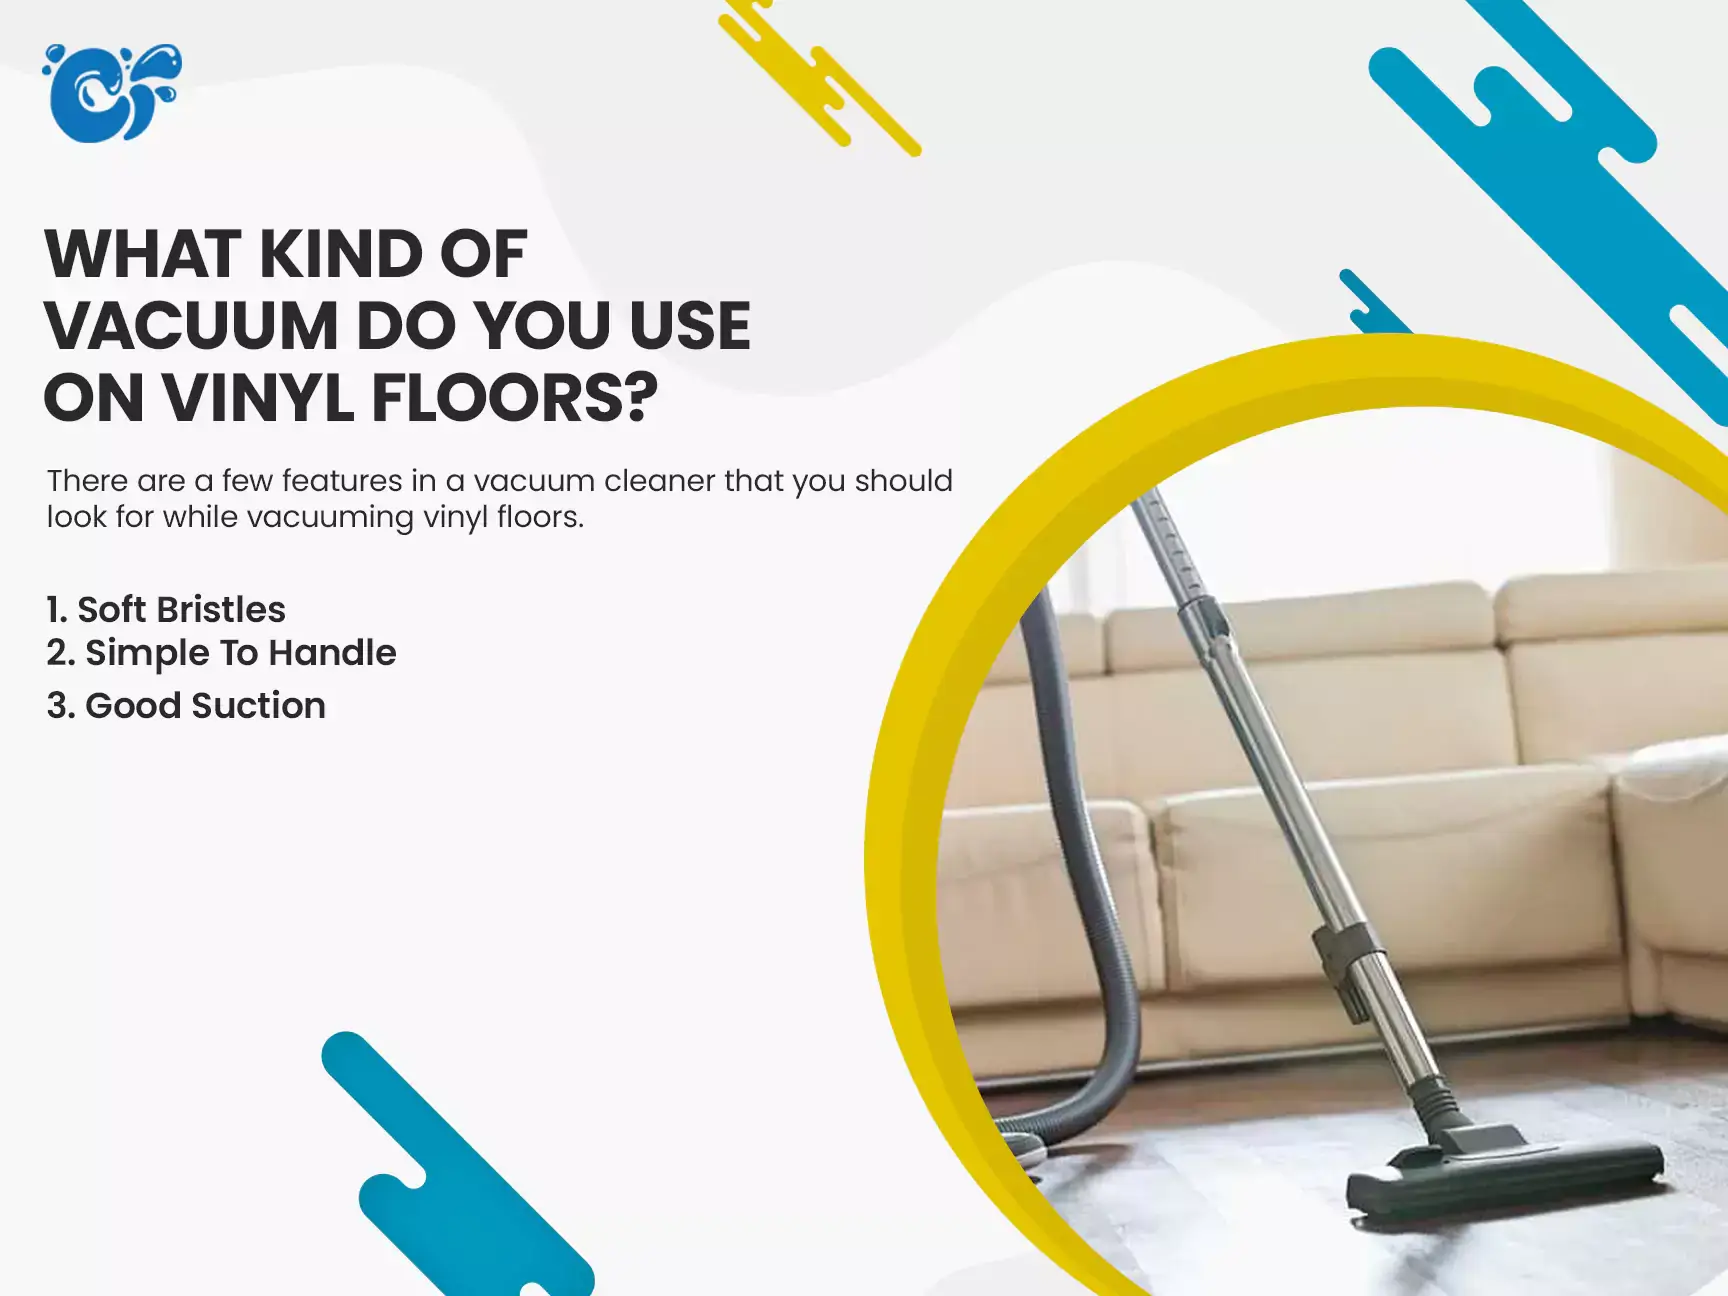 What Kind Of Vacuum Do You Use On Vinyl Floors?